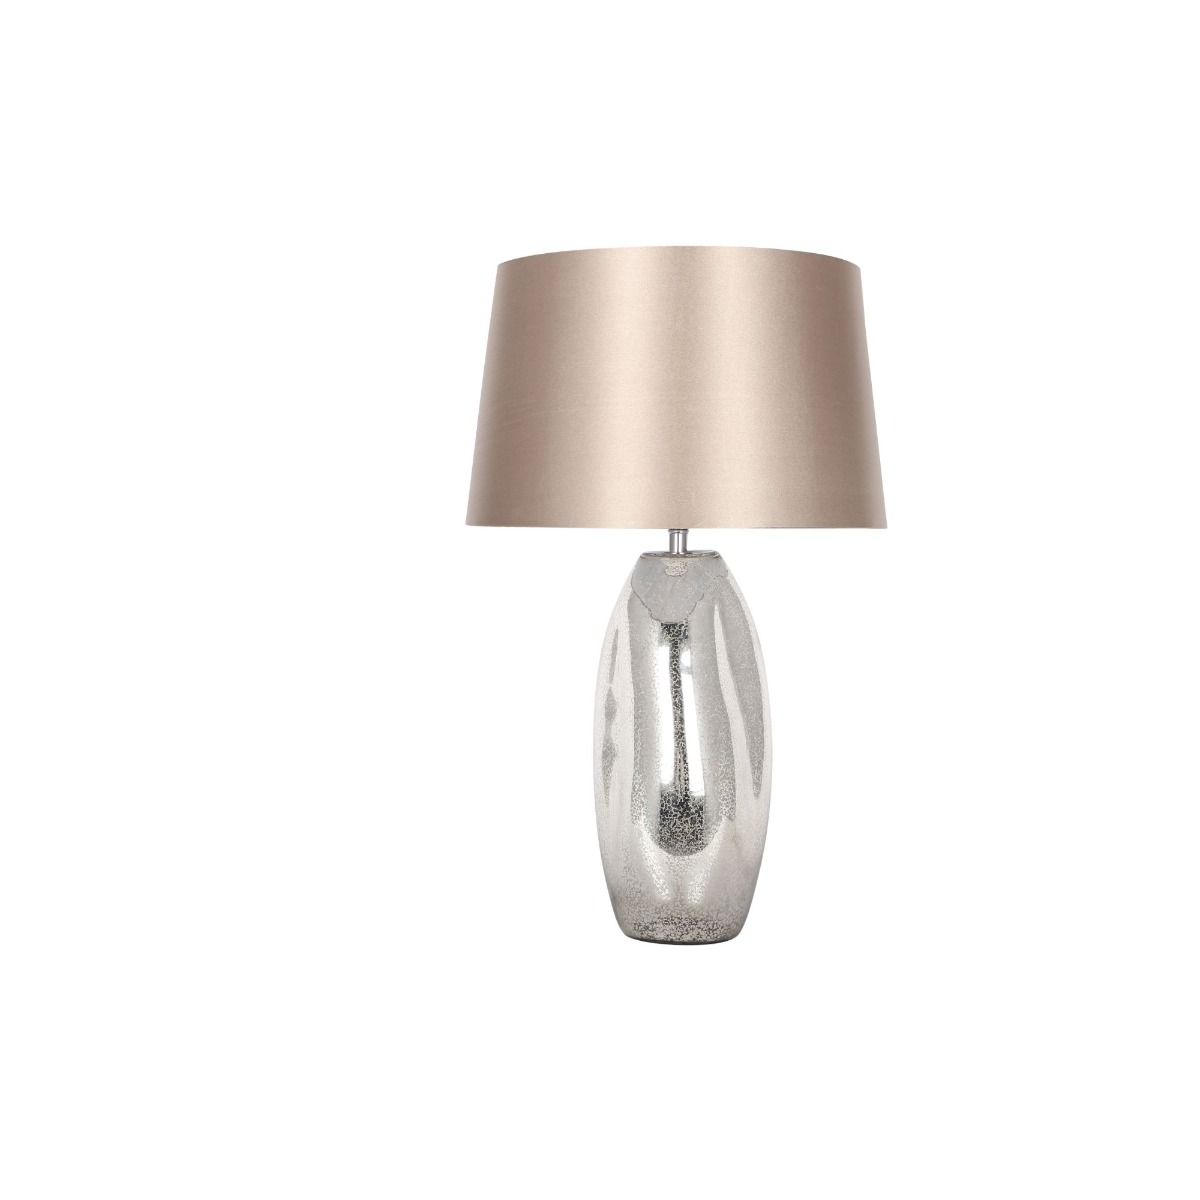 Josie Mercury Effect Glass Table Lamp Silver with Taupe Shade